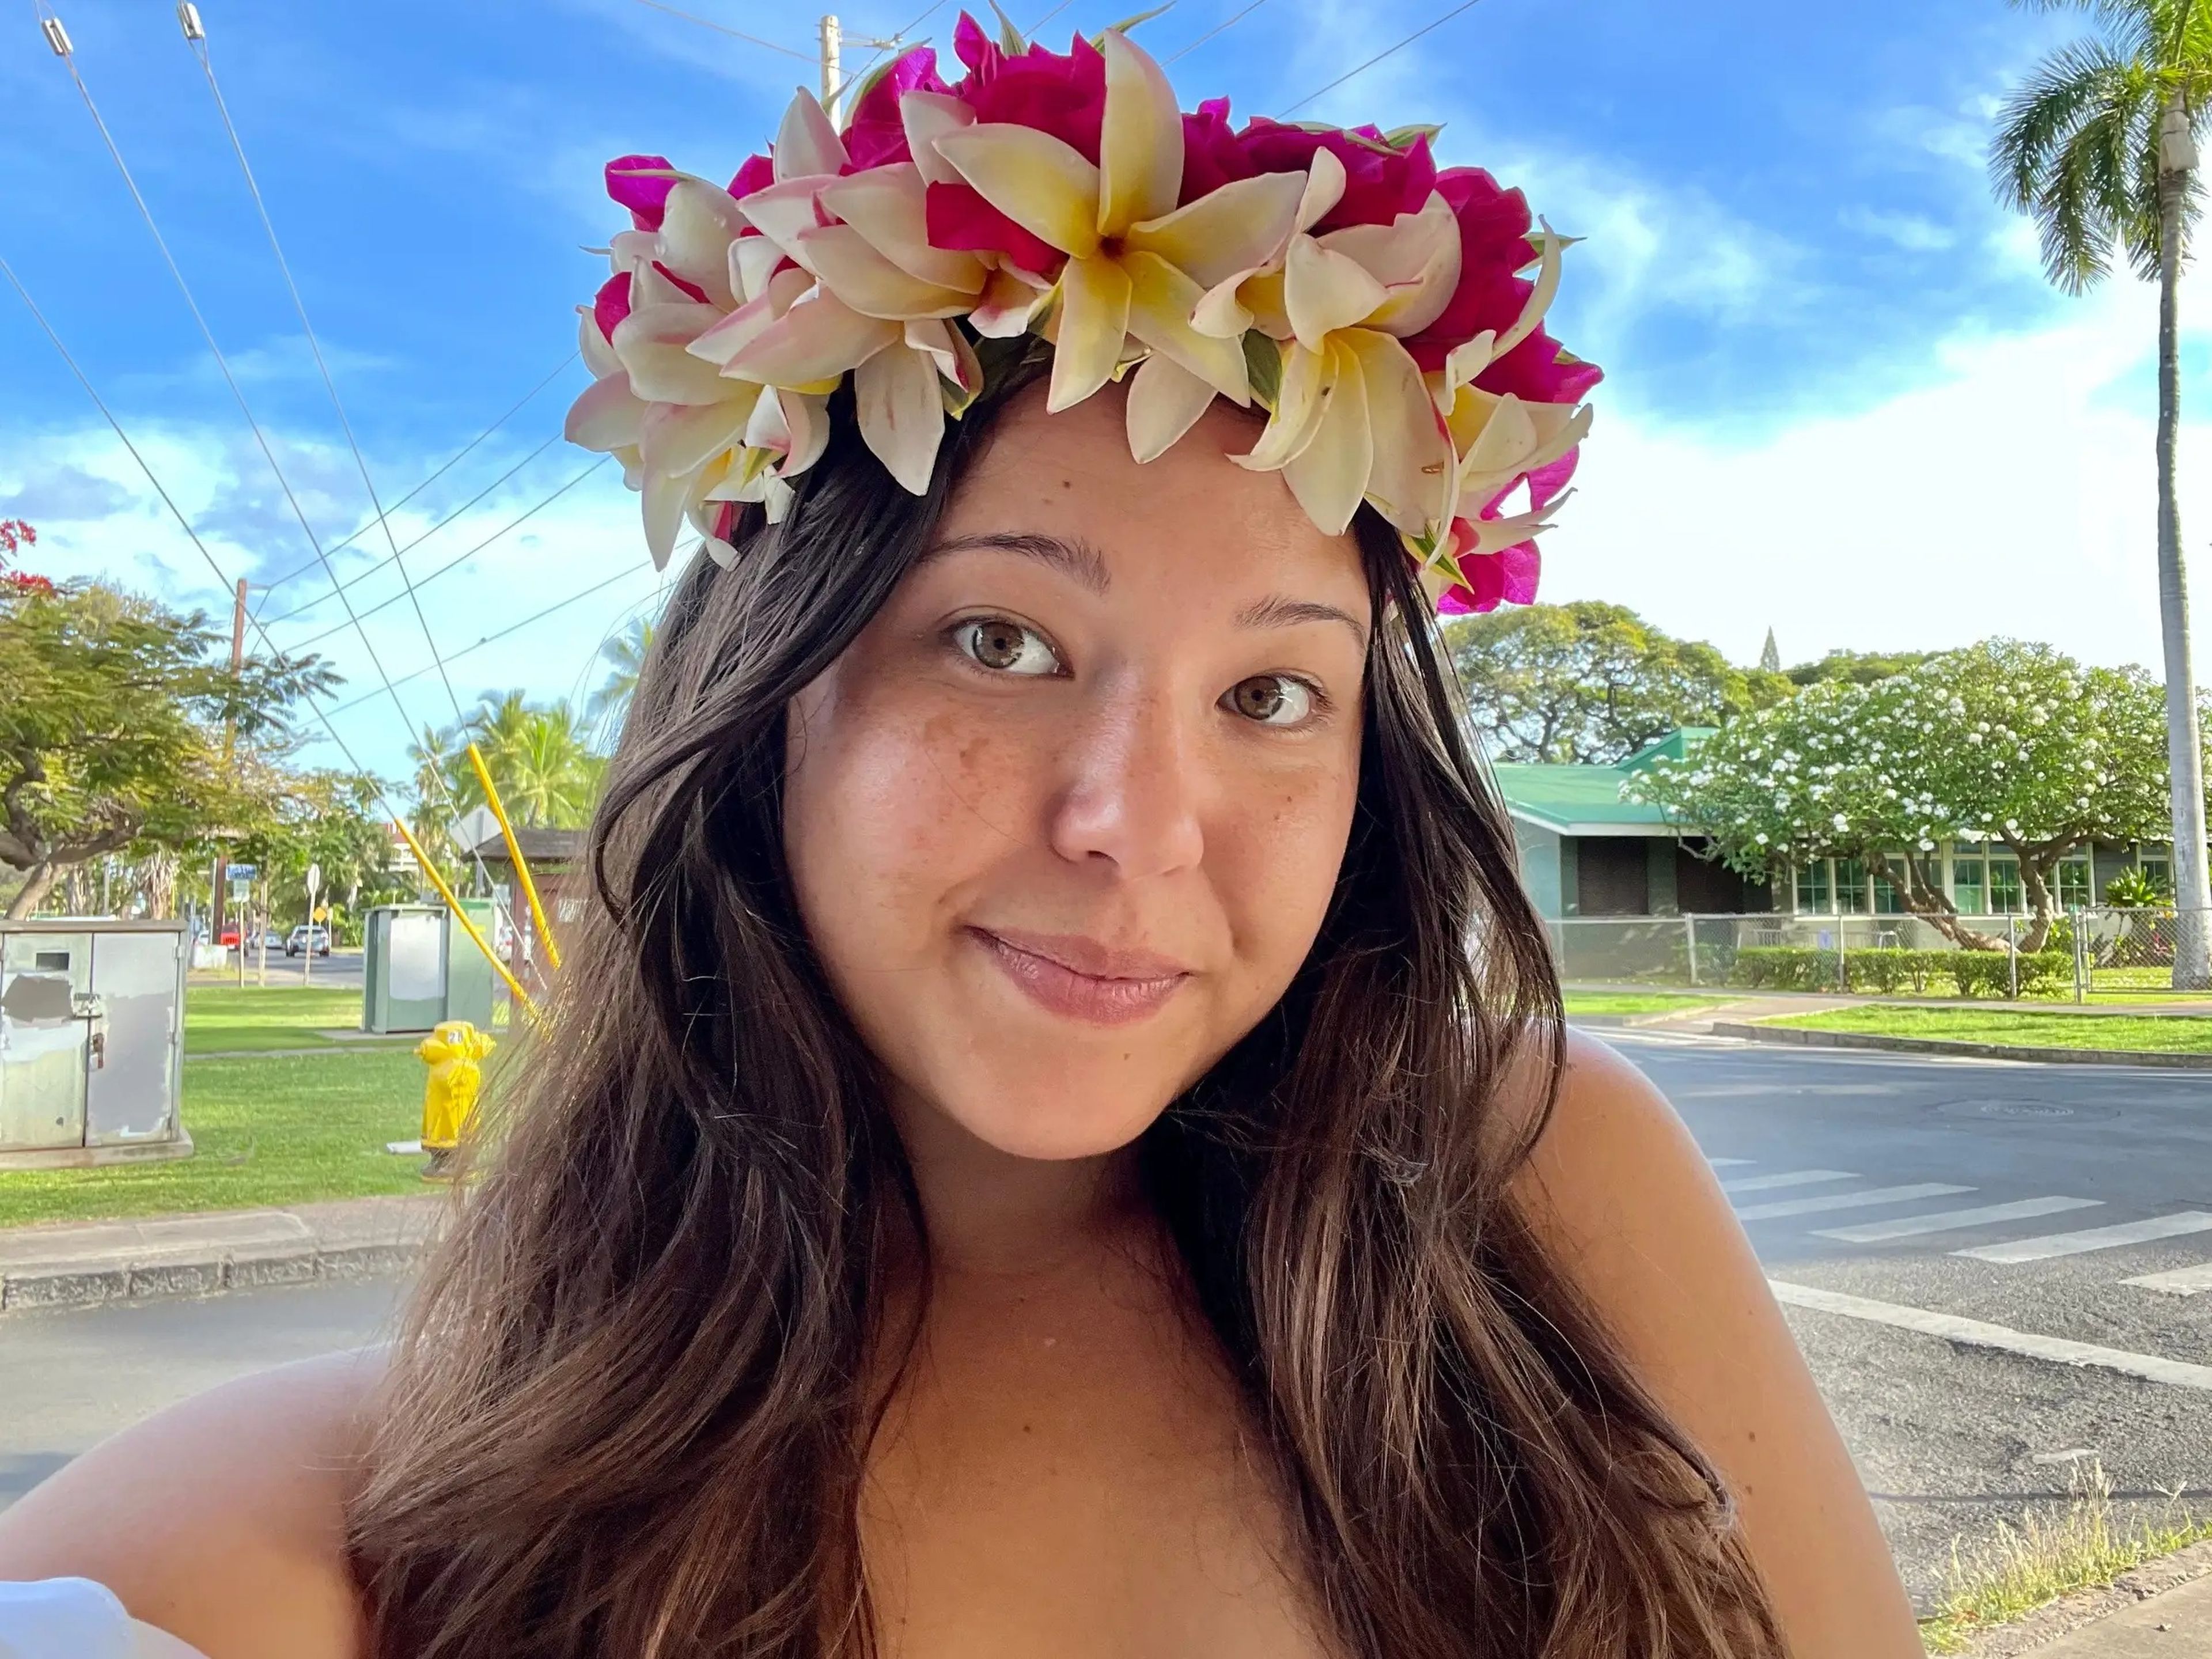 Ashley Probst smiling with lei on her head